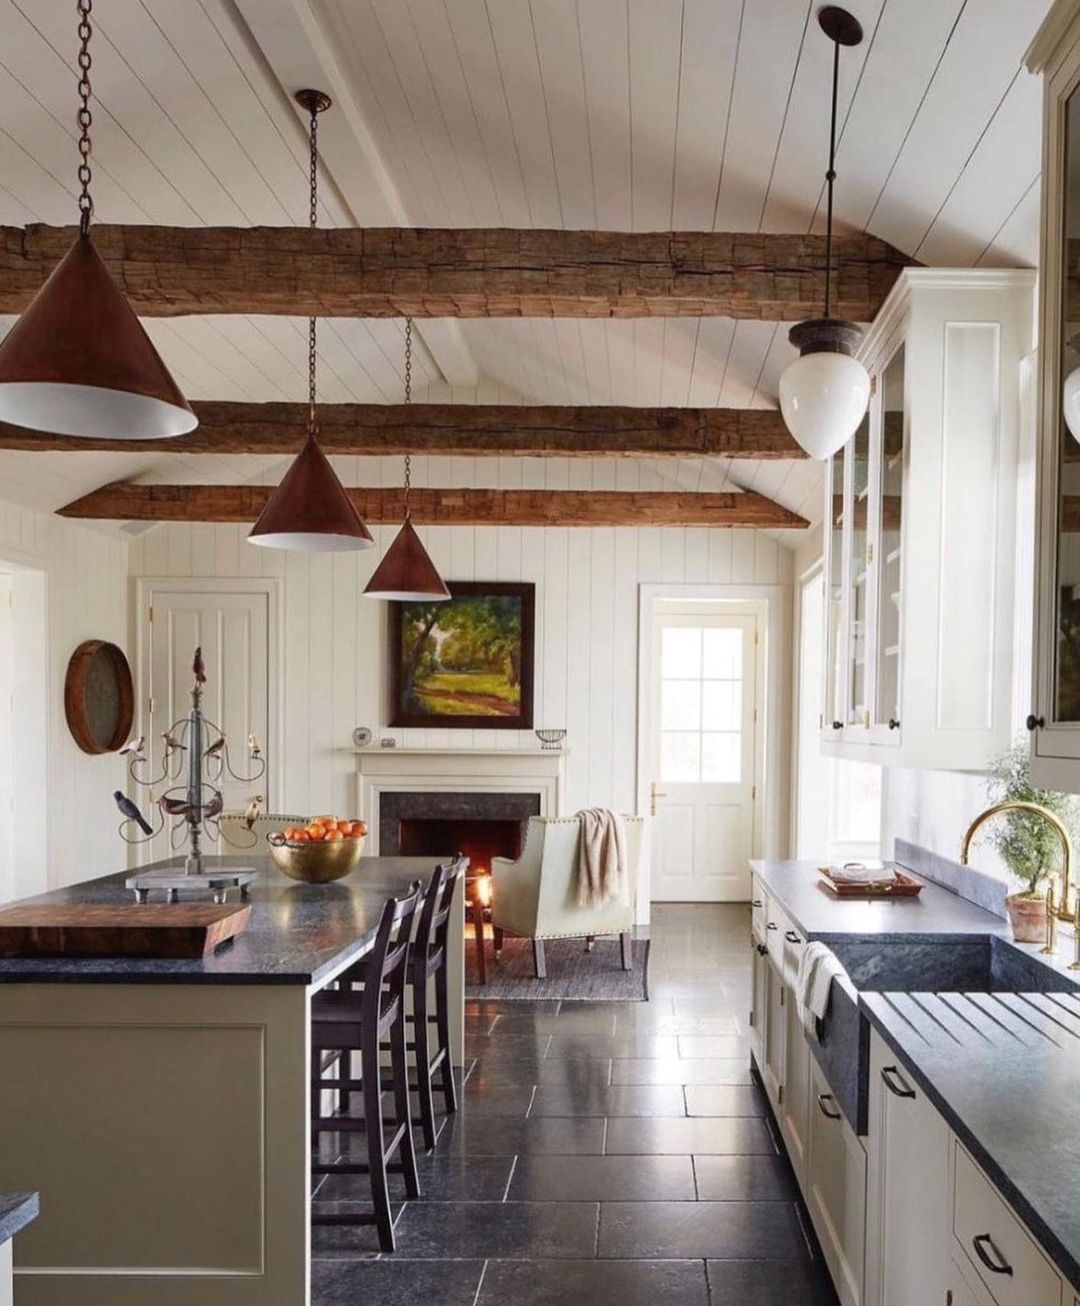 Country Charm with Rustic Overhead Beams